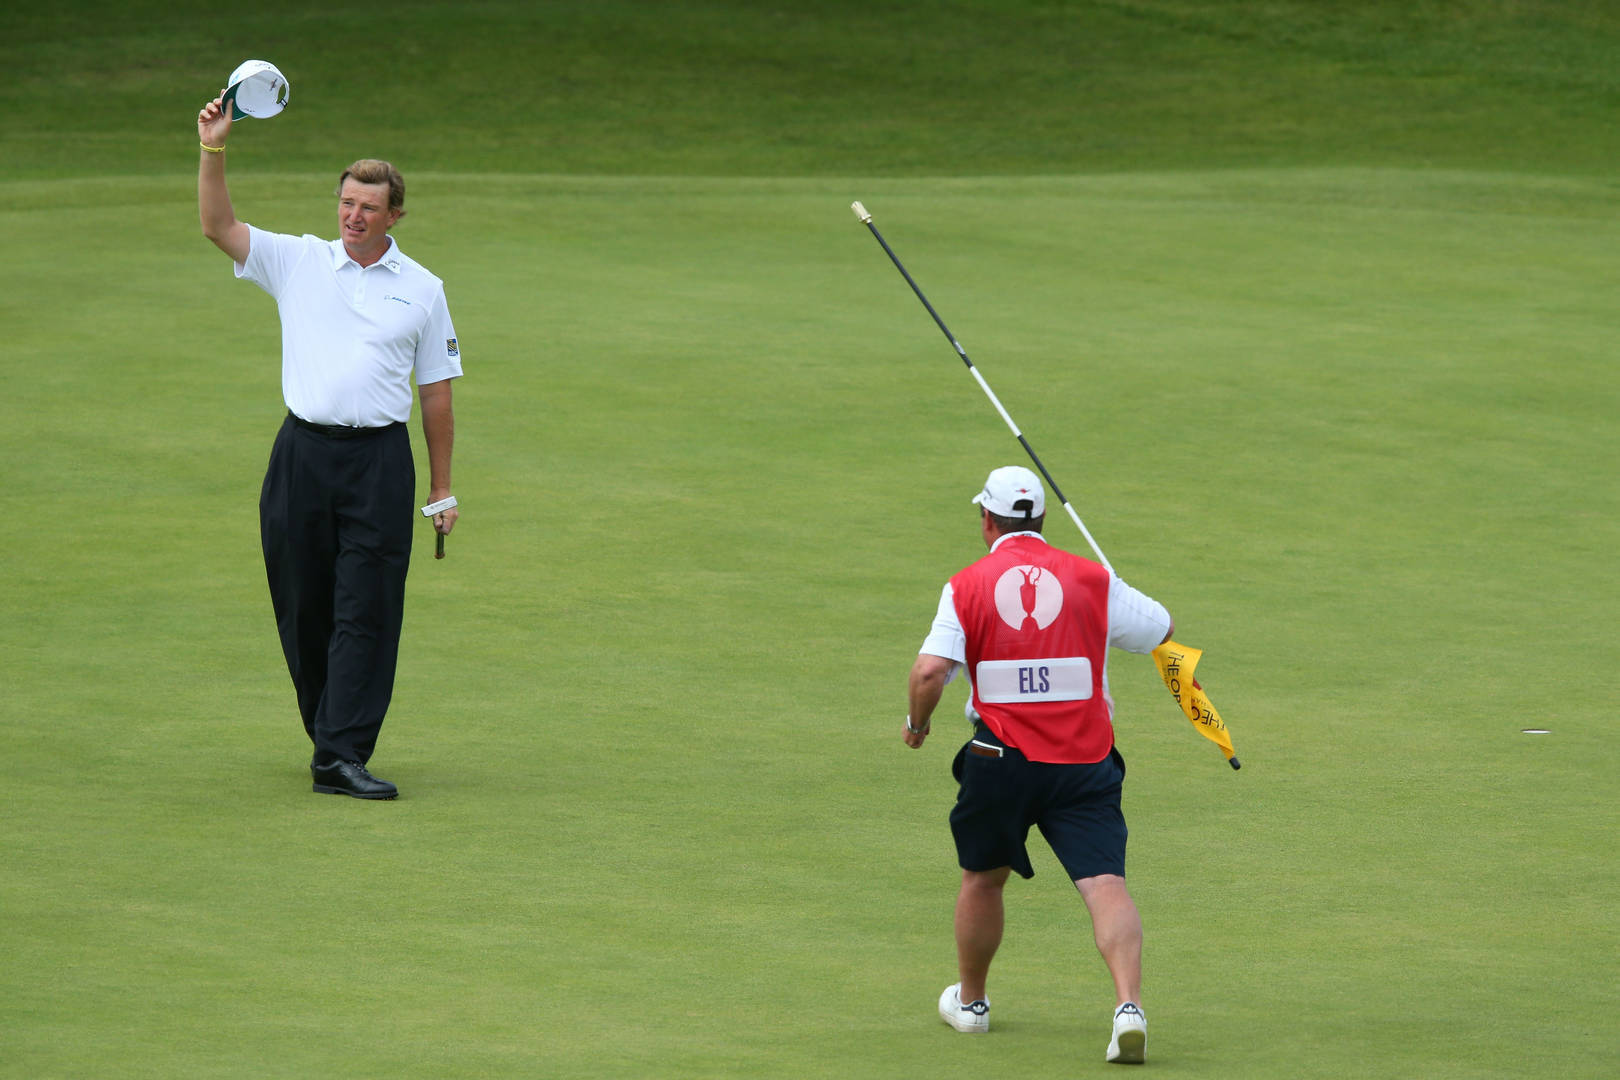 South African Pro Golfer Ernie Els with His Caddy on the Golf Course Wallpaper